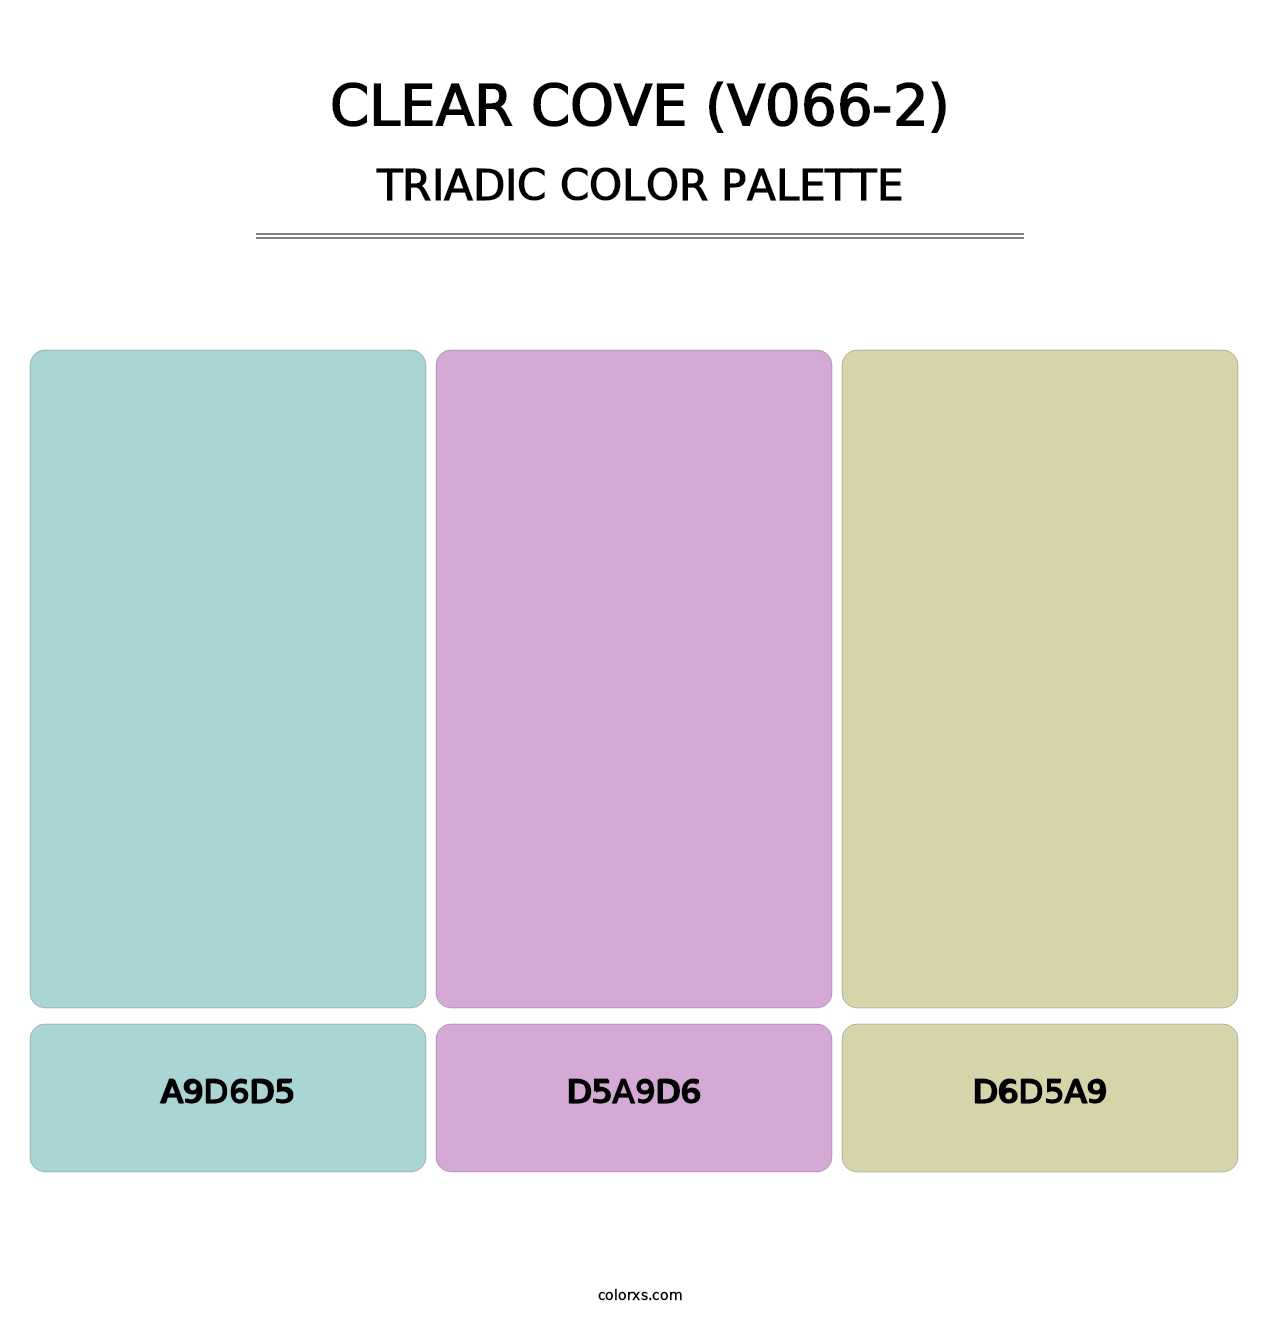 Clear Cove (V066-2) - Triadic Color Palette